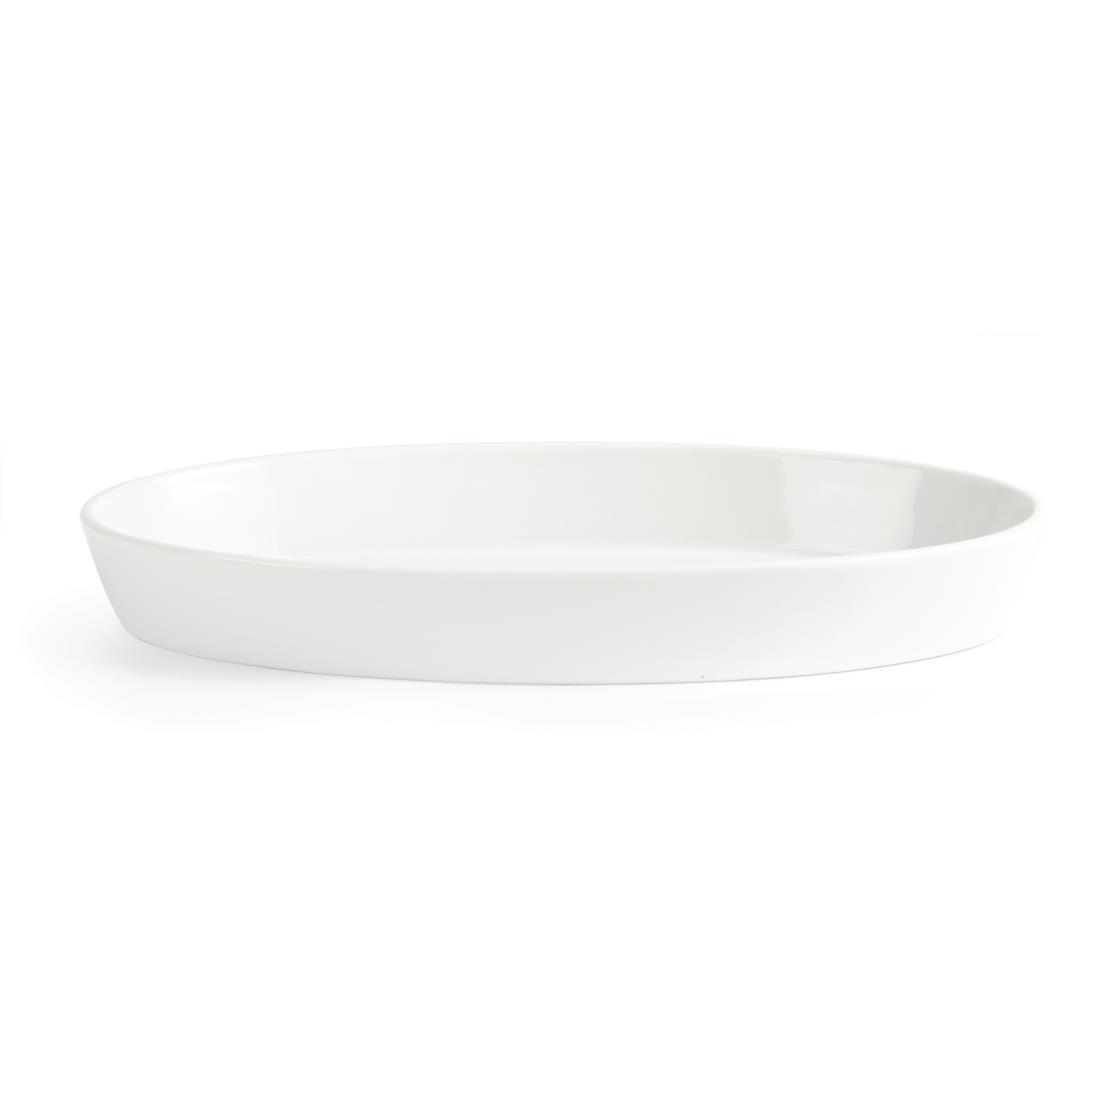 Olympia Whiteware Oval Sole Dishes 330x 180mm (Pack of 6) - W422  - 3